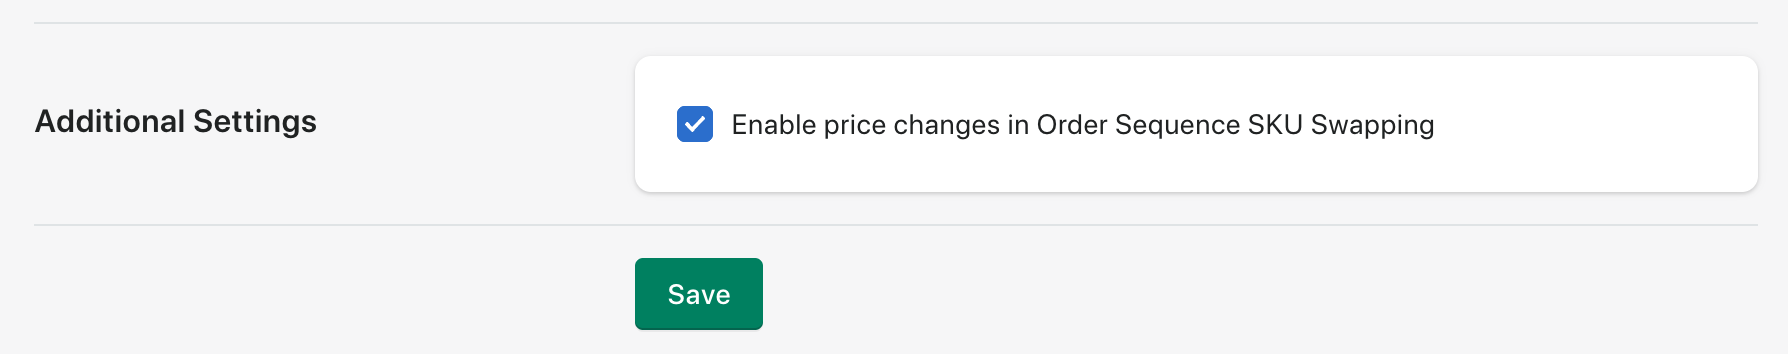 enable_price_changes.png